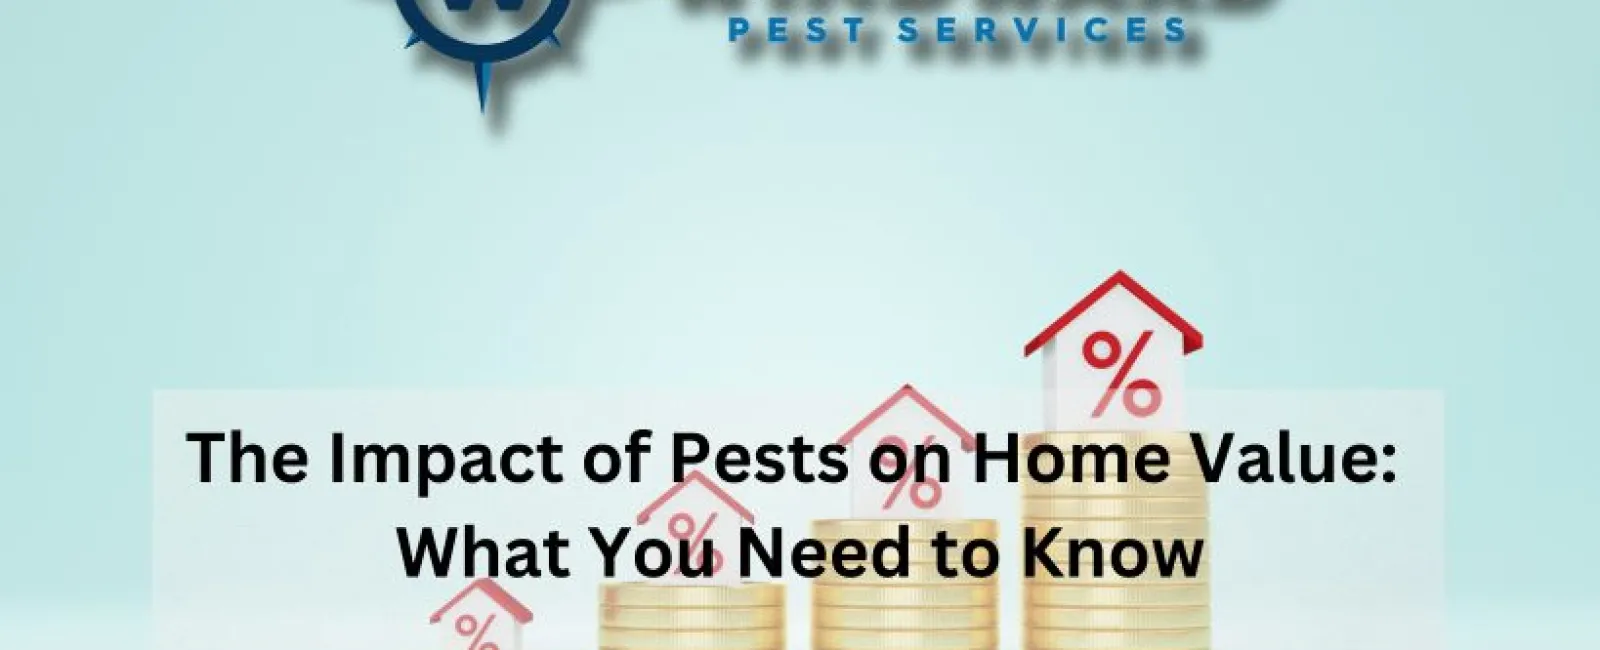 The Impact of Pests on Home Value: What You Need to Know